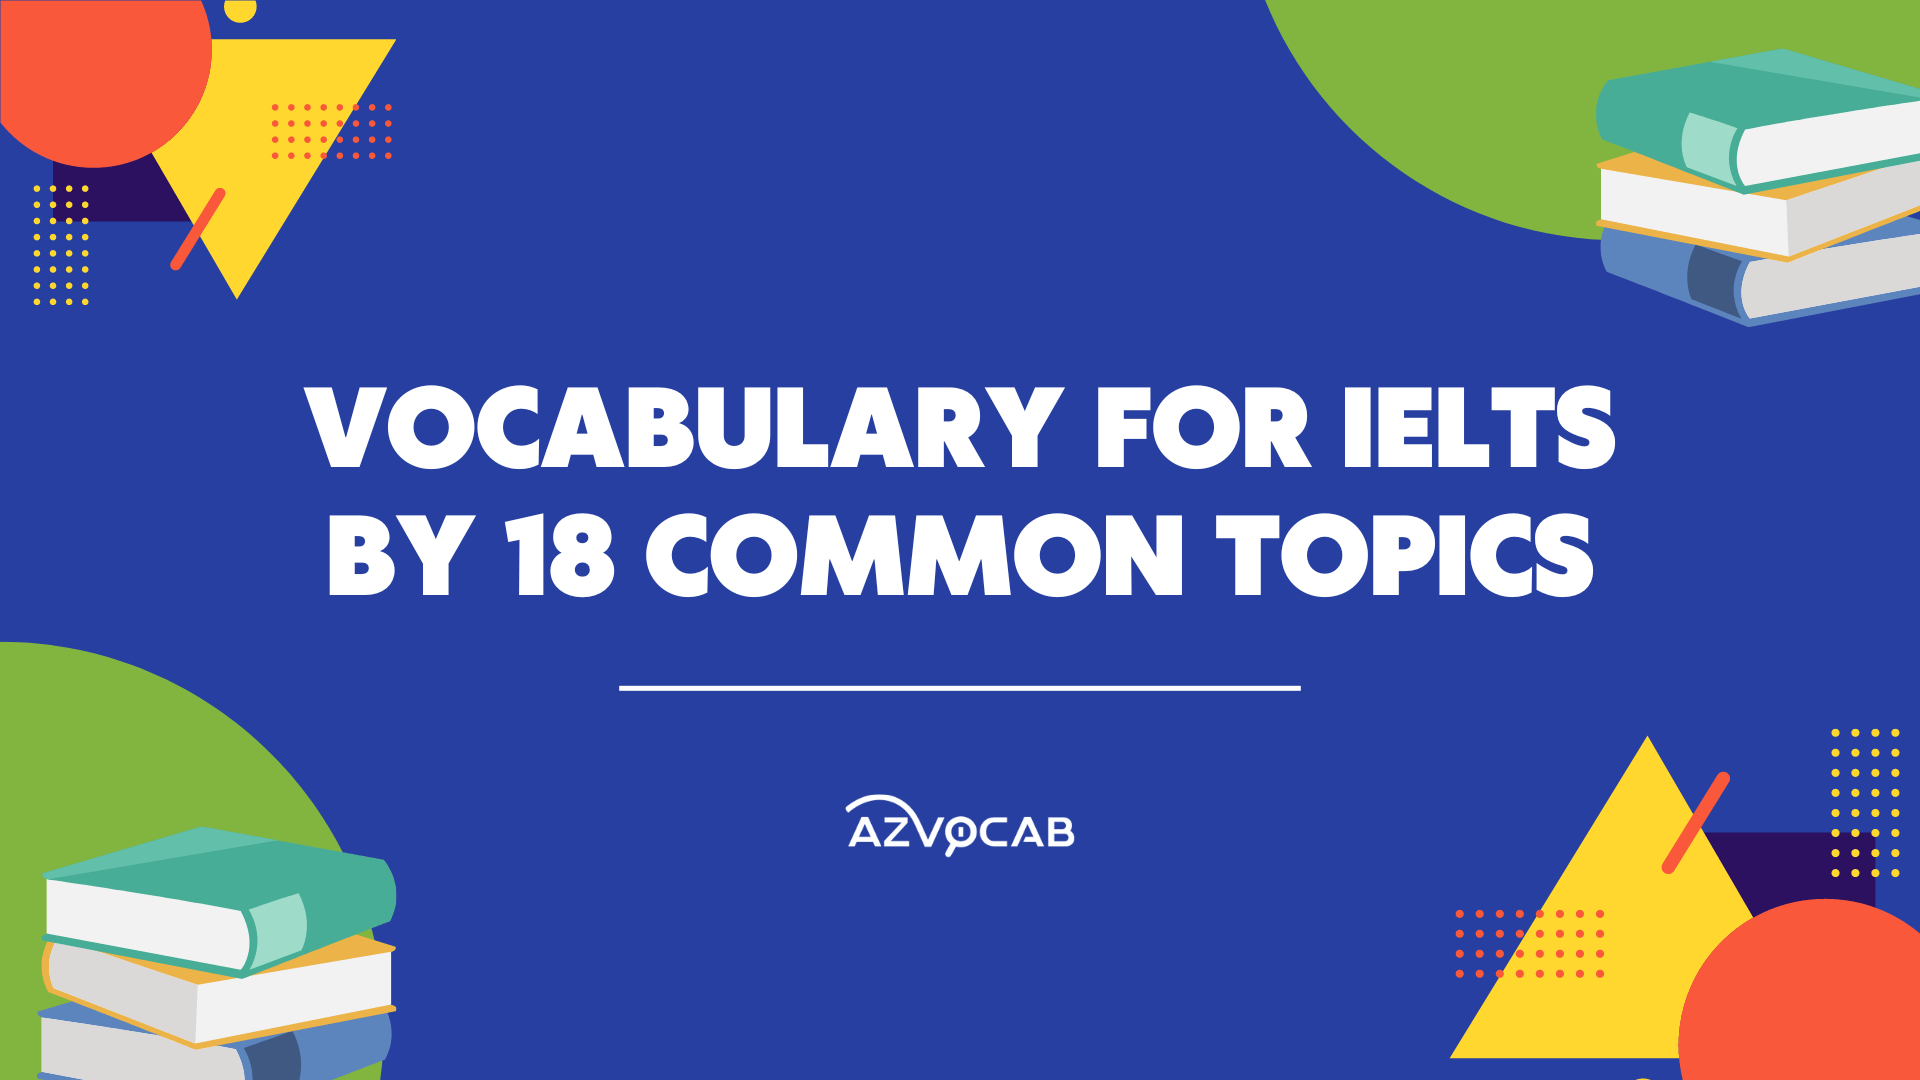 VOCABULARY FOR IELTS BY 18 COMMON TOPICS